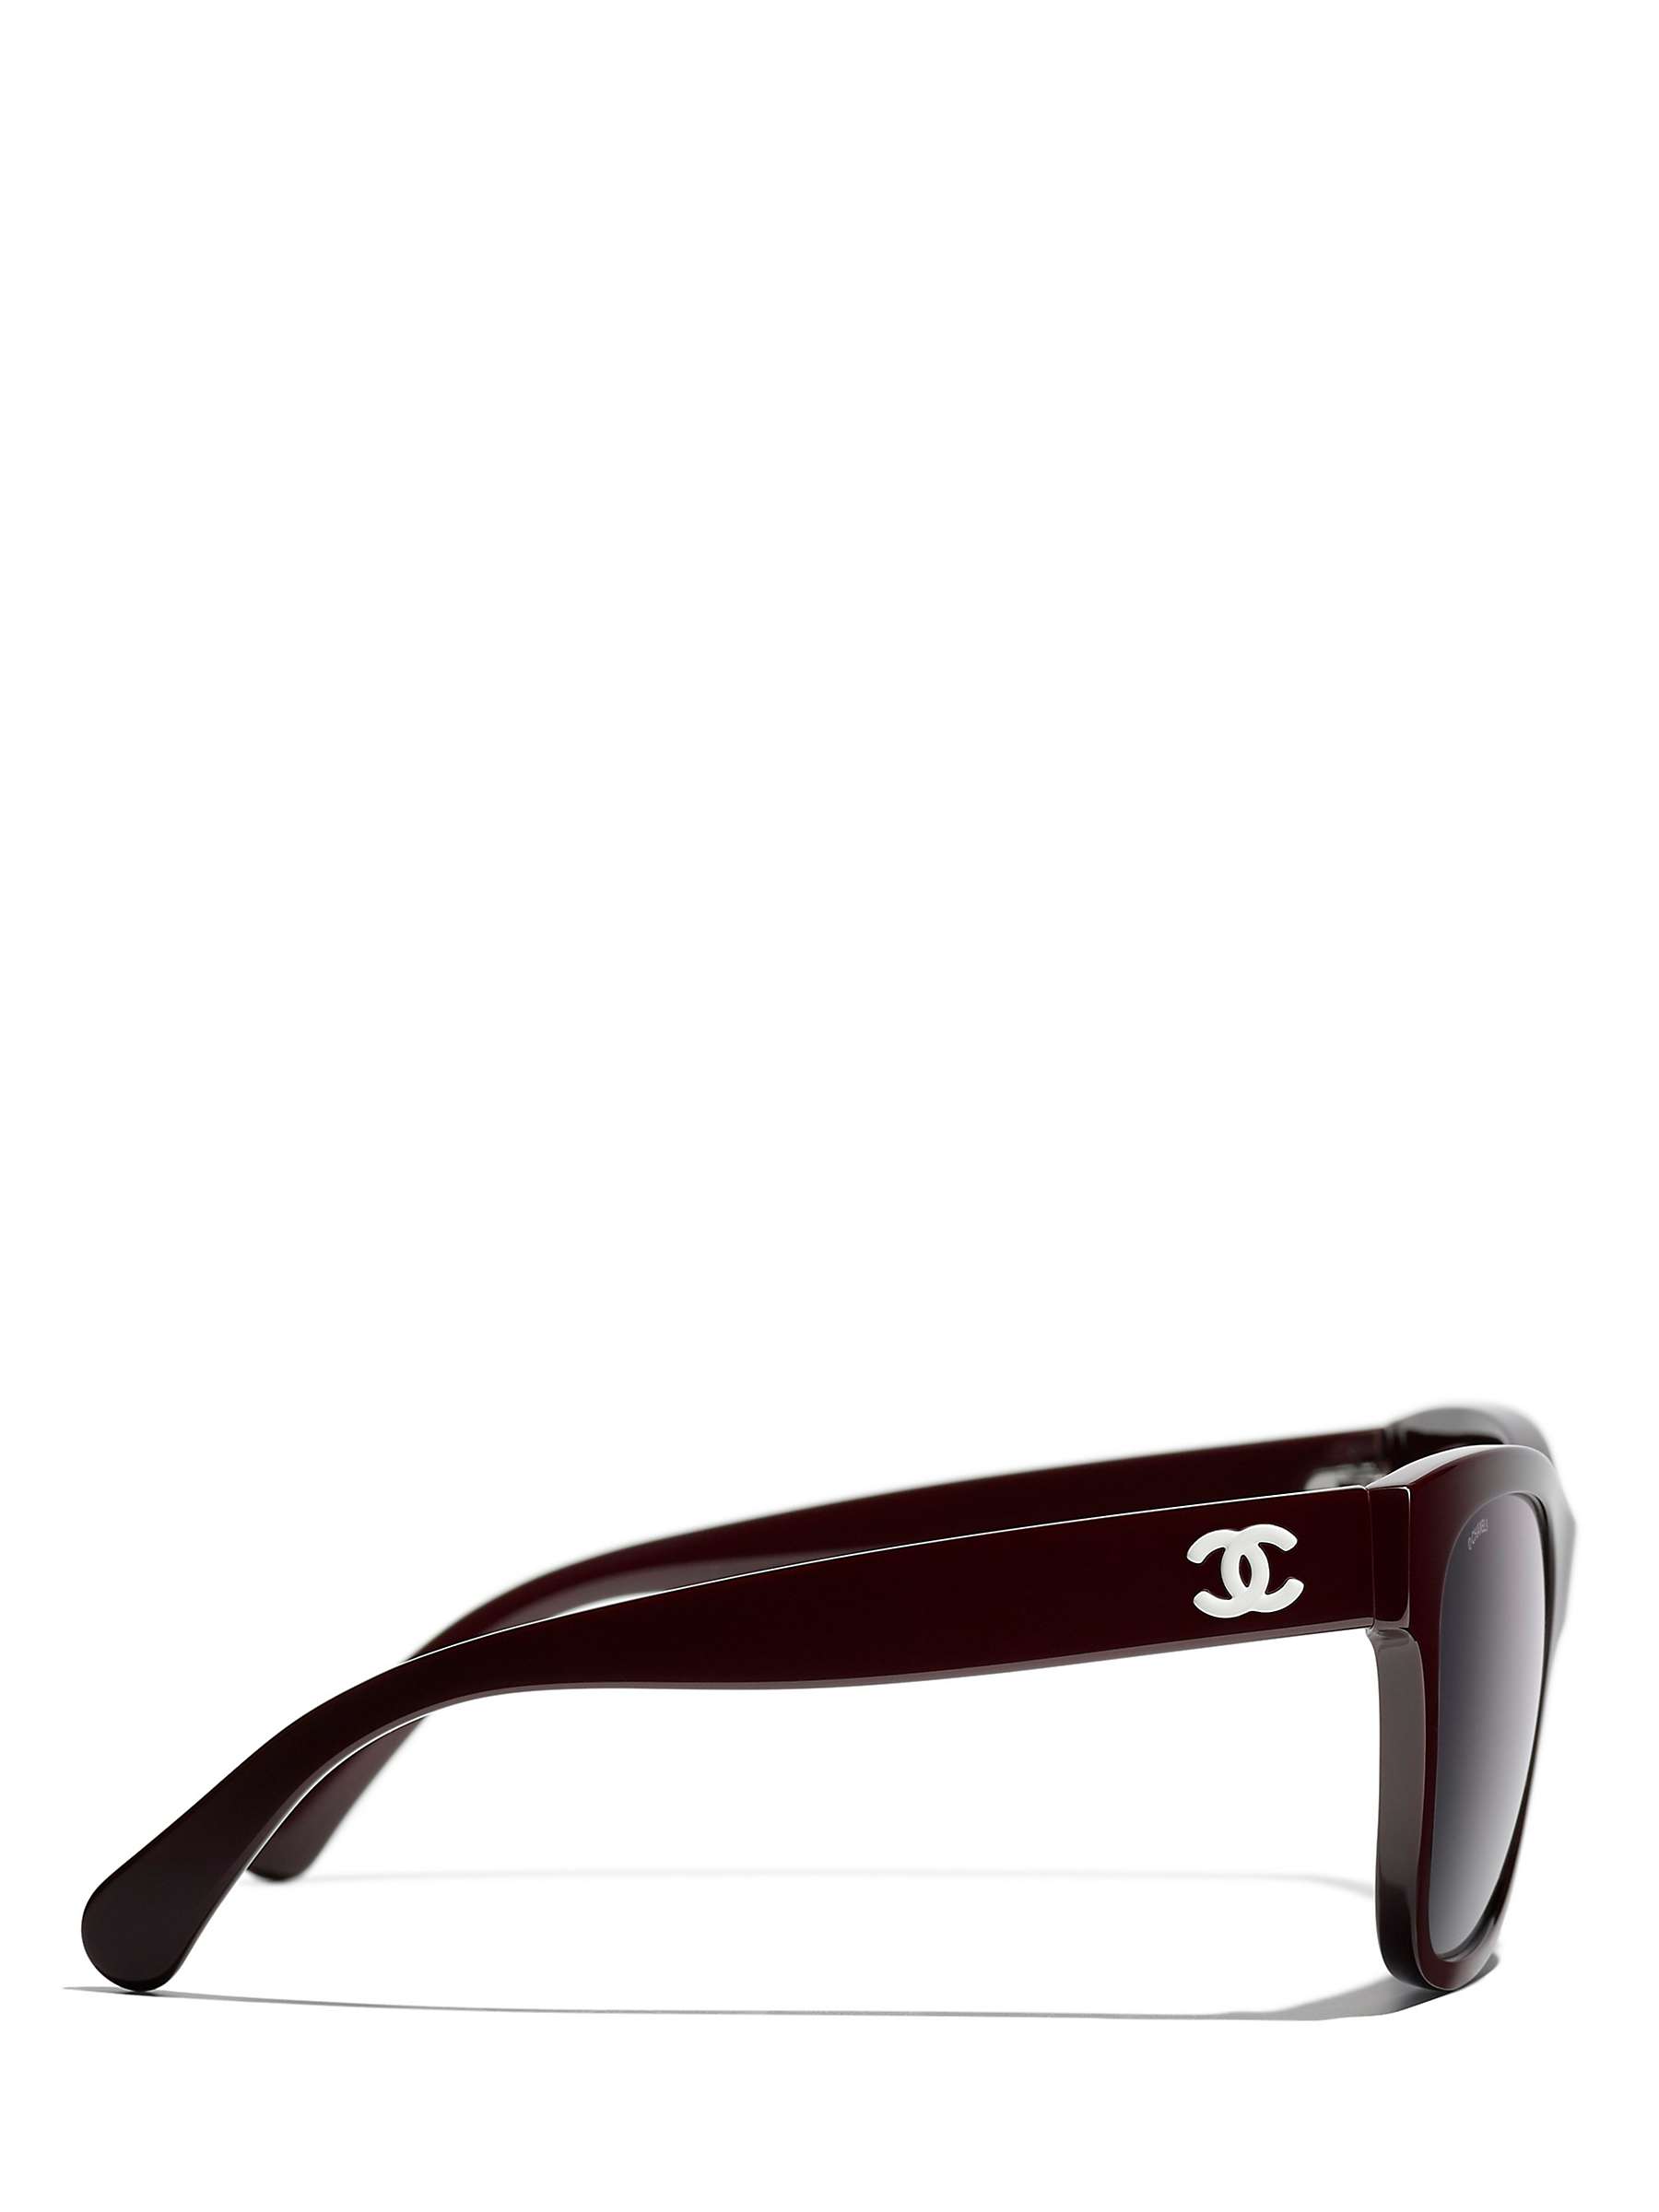 CHANEL Square Sunglasses CH5380 Dark Red/Grey Gradient at John Lewis ...